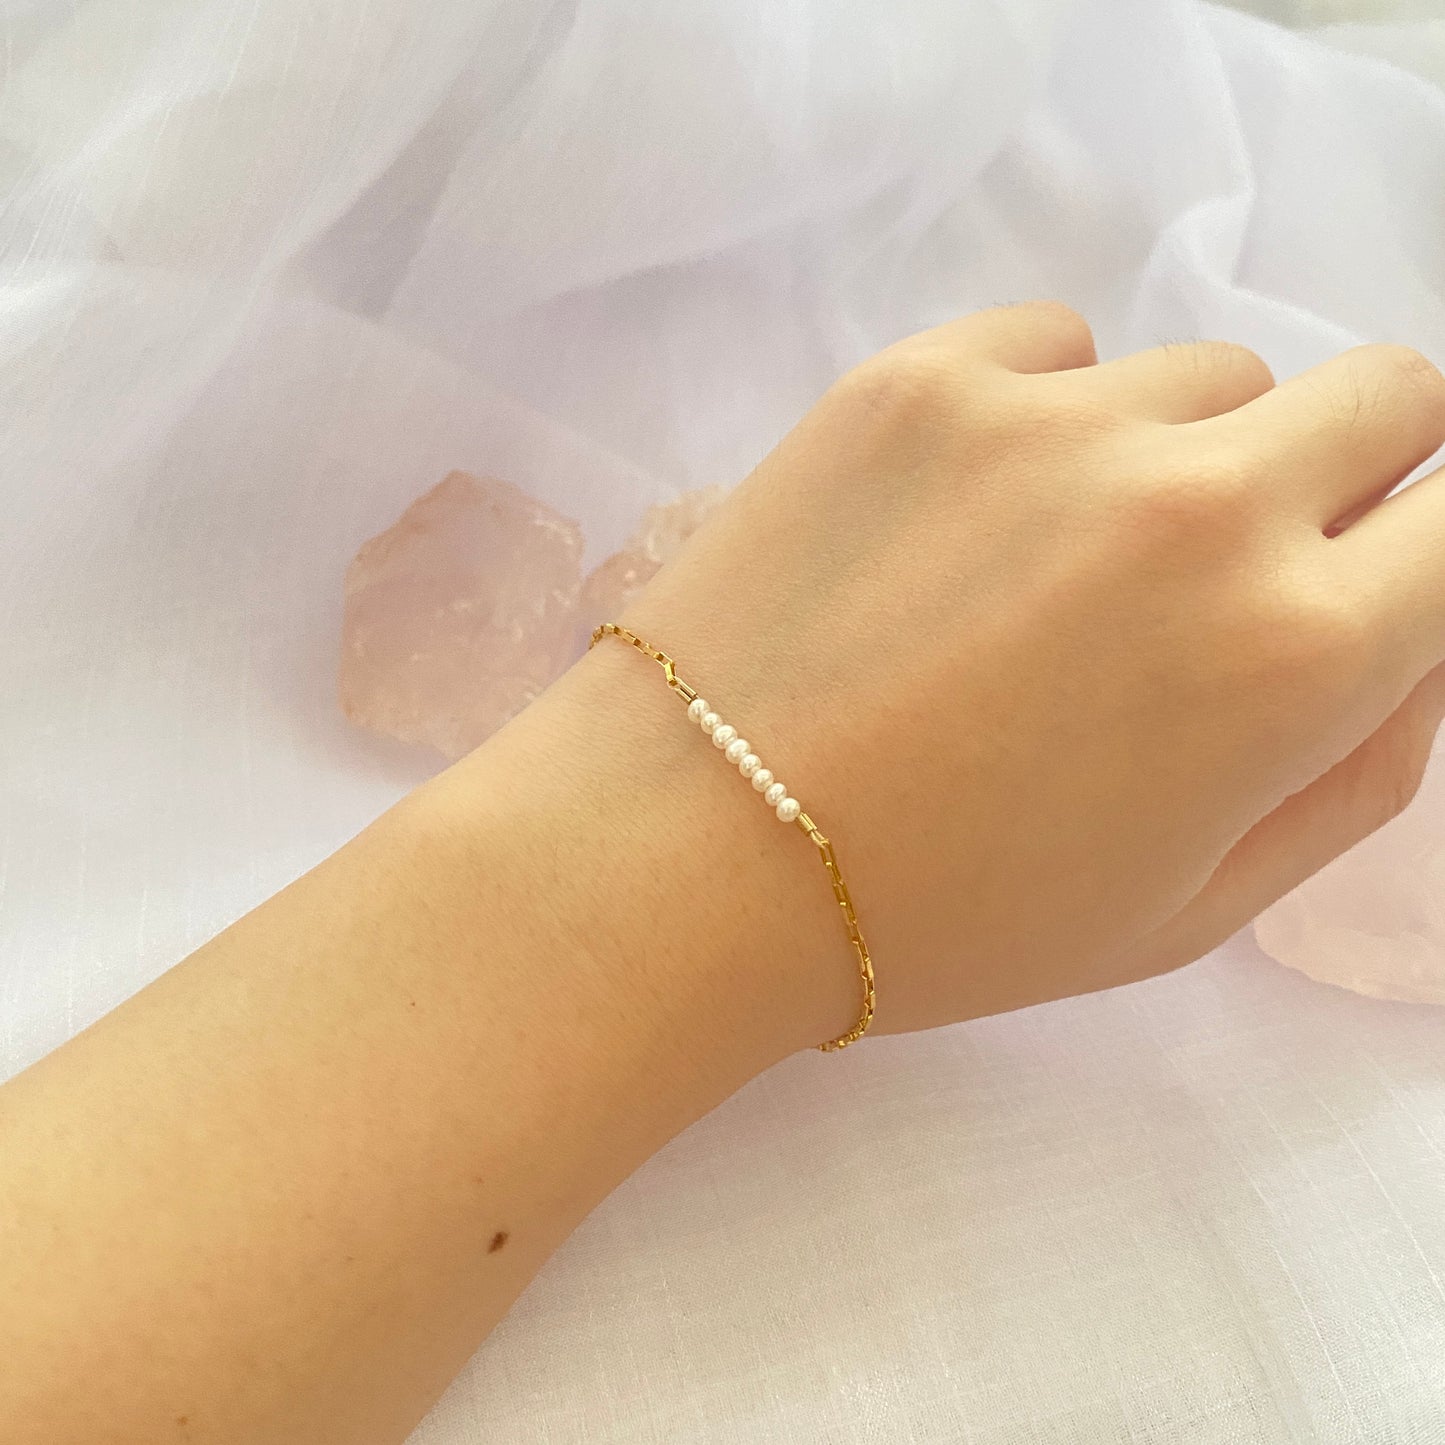 Kateryna Bracelet - 14k Gold filled chain with Freshwater pearls